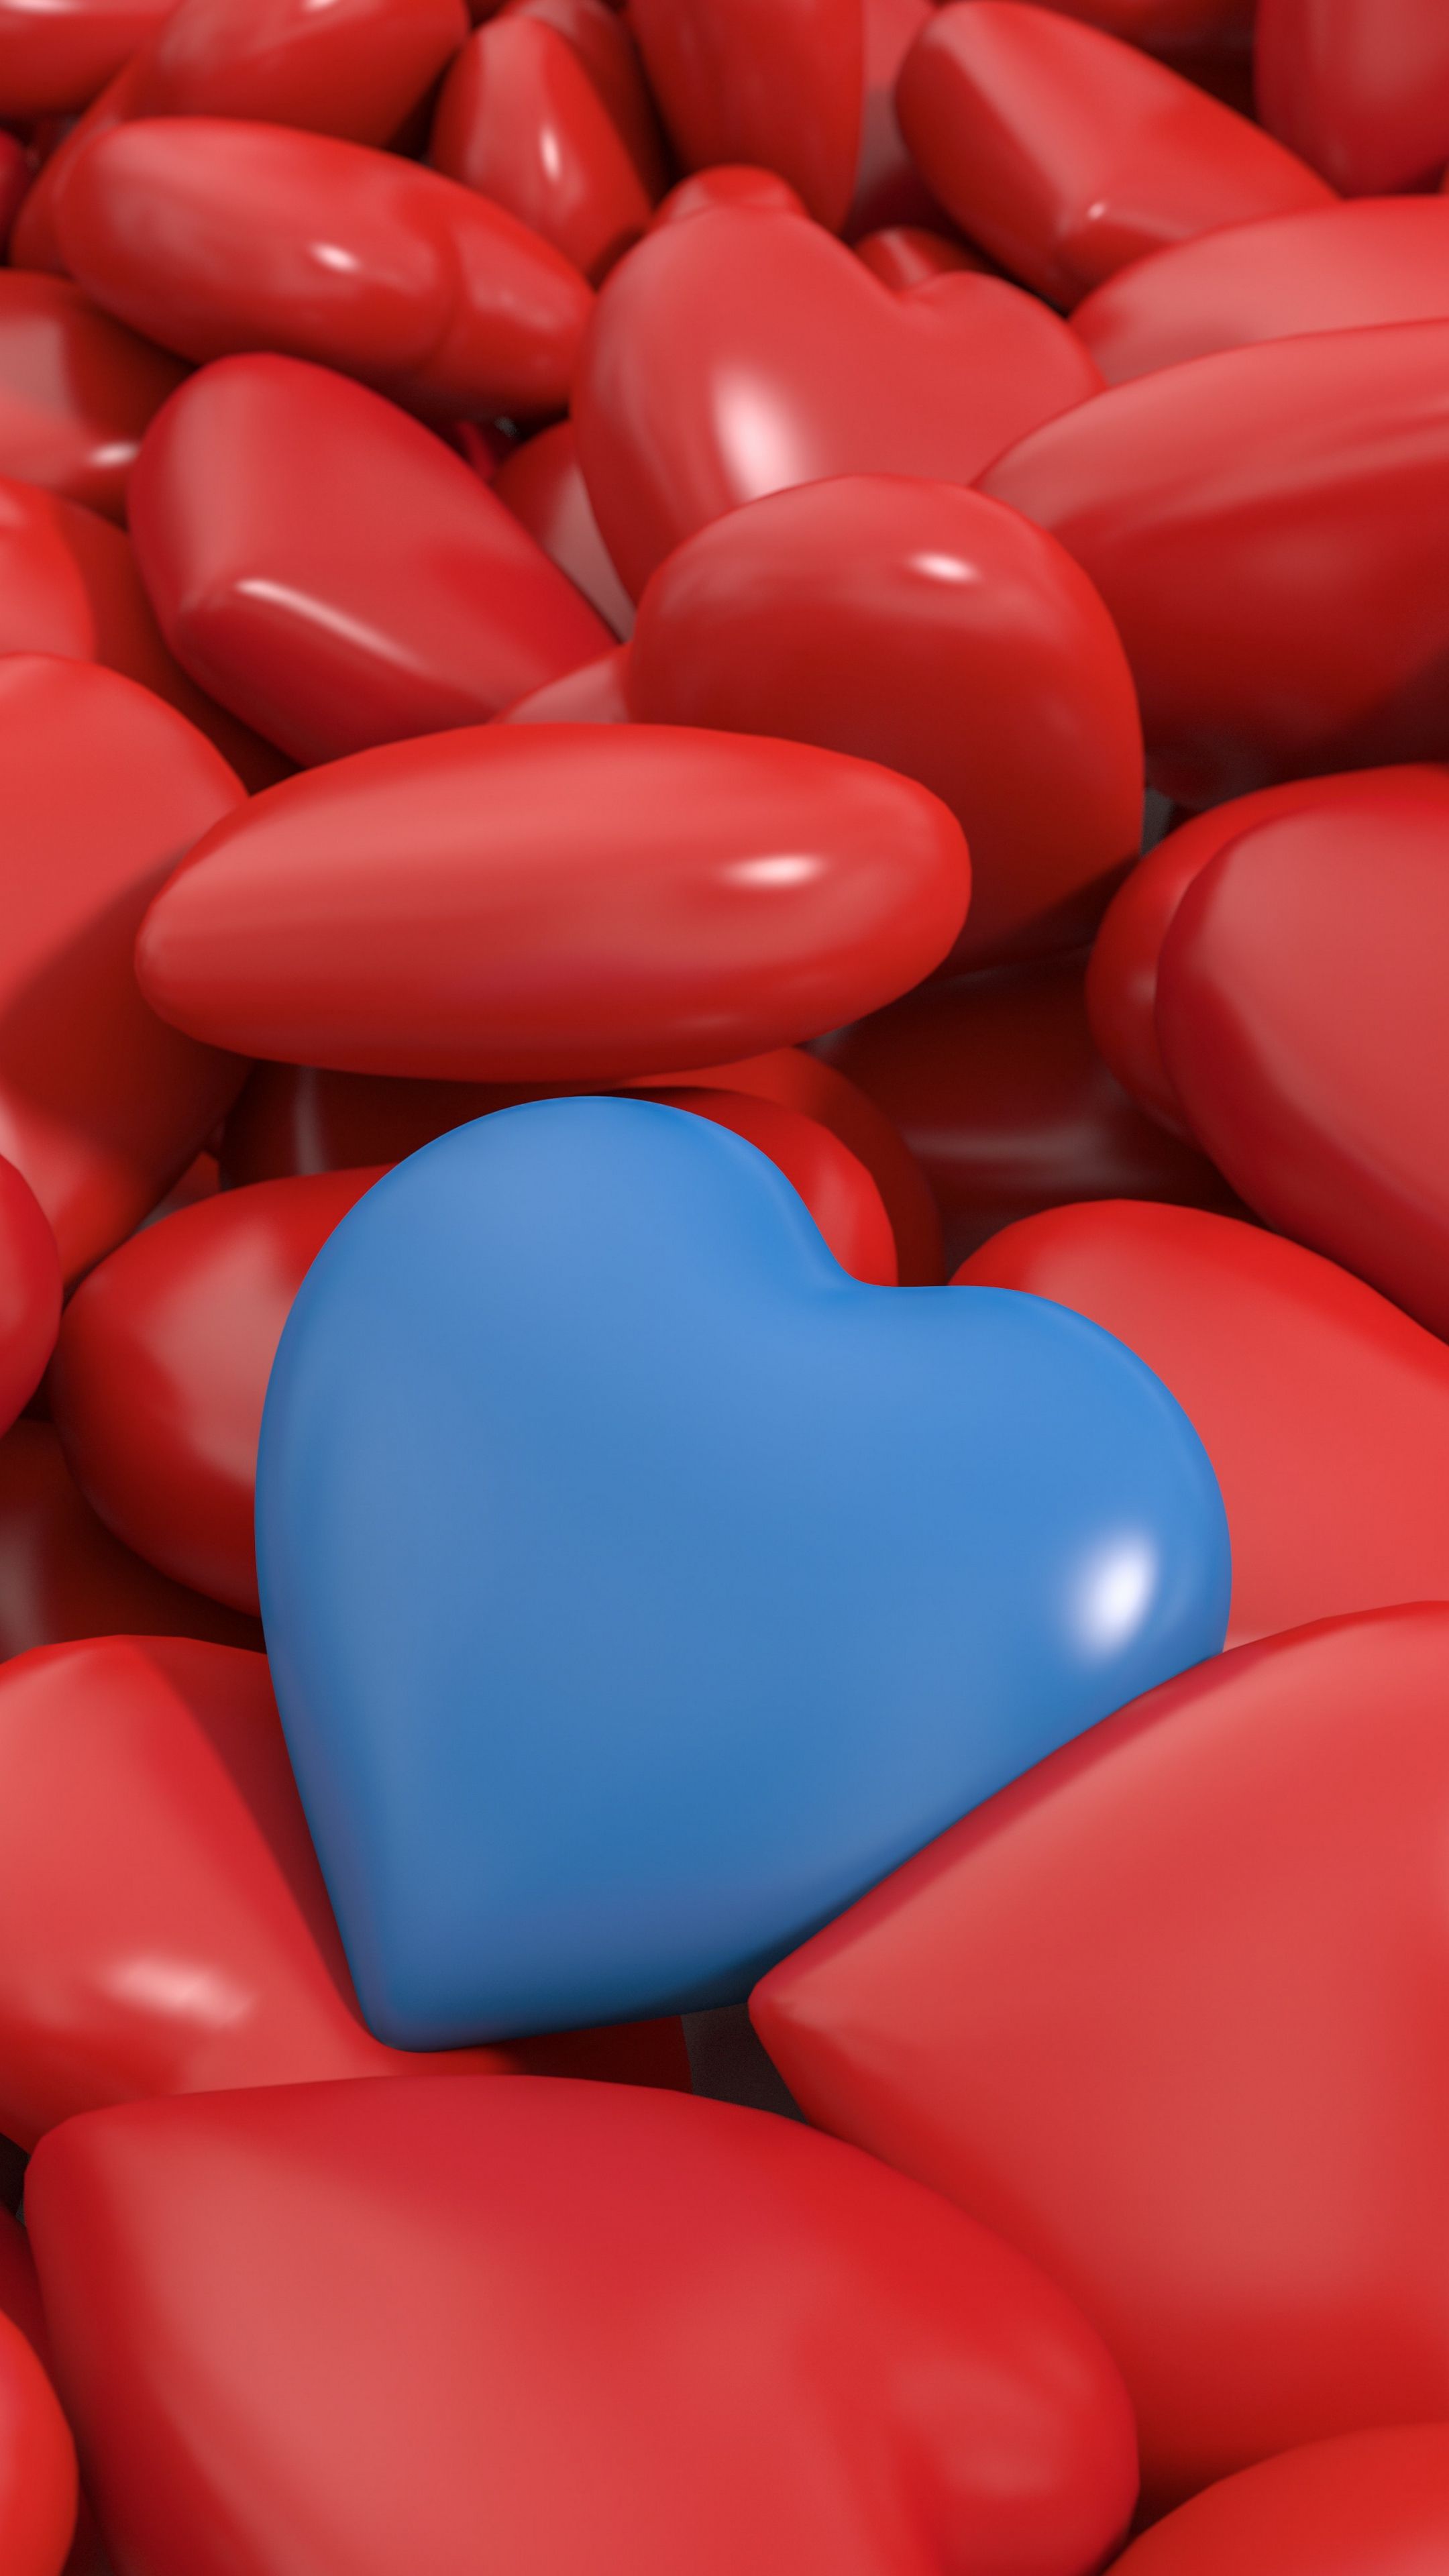 Red and Blue Heart Wallpaper Free Red and Blue Heart Background